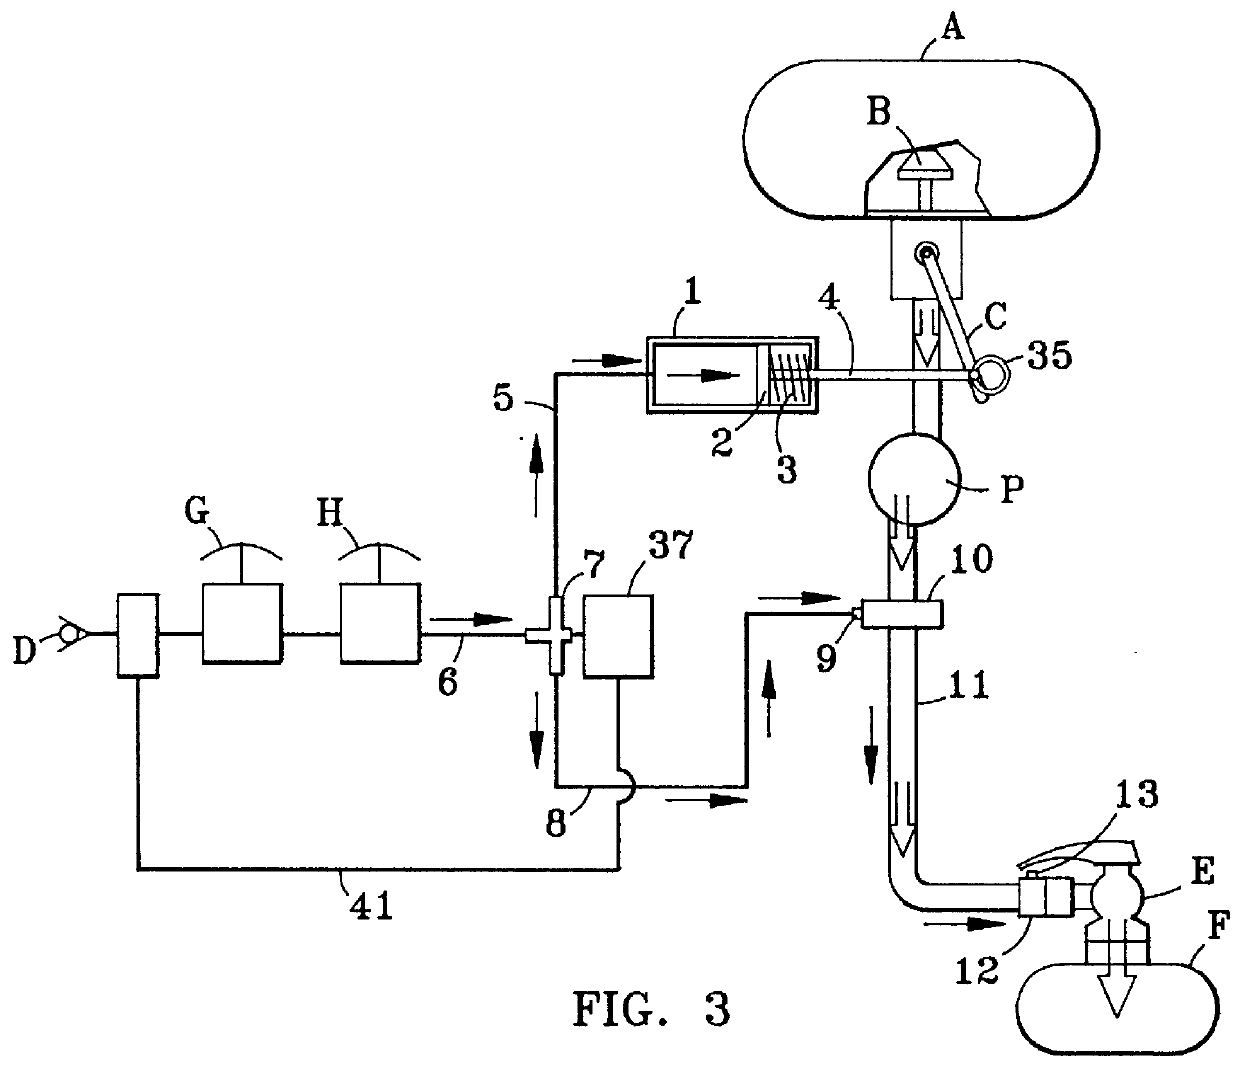 Multicannular fluid delivery system with pressure sensitive alarm